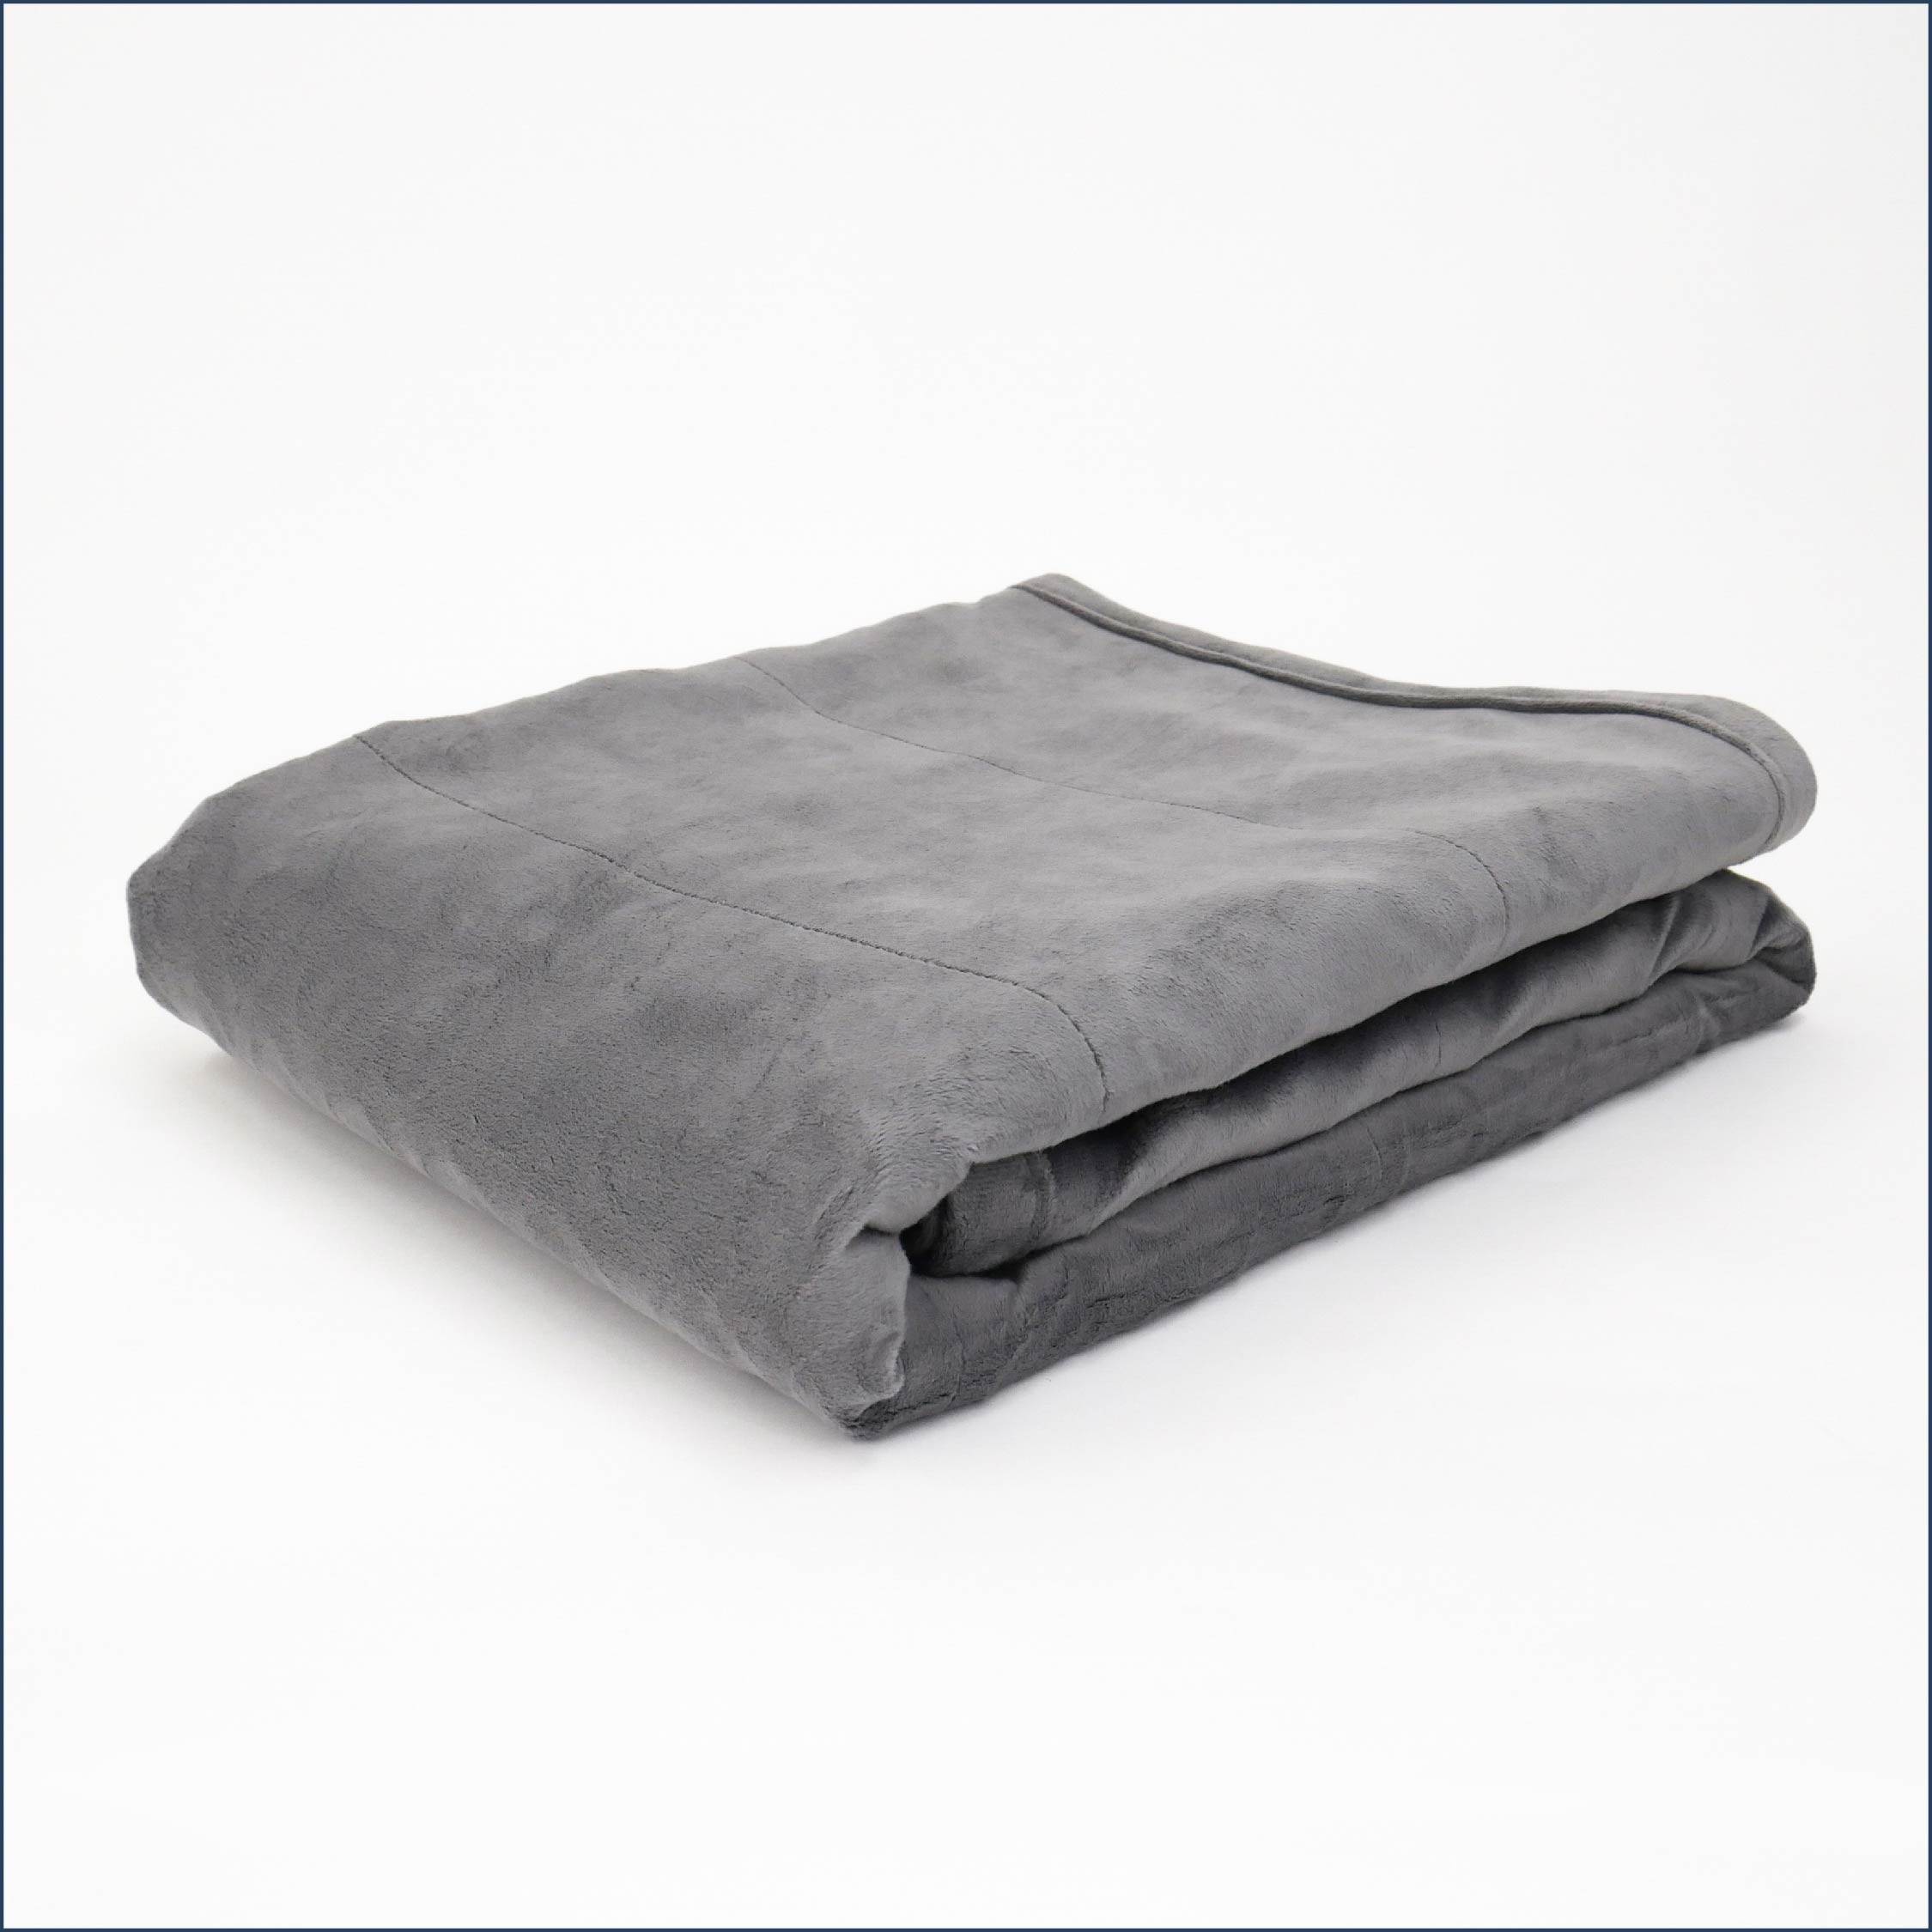 Tuc Cool Weighted Blanket folded on white background.